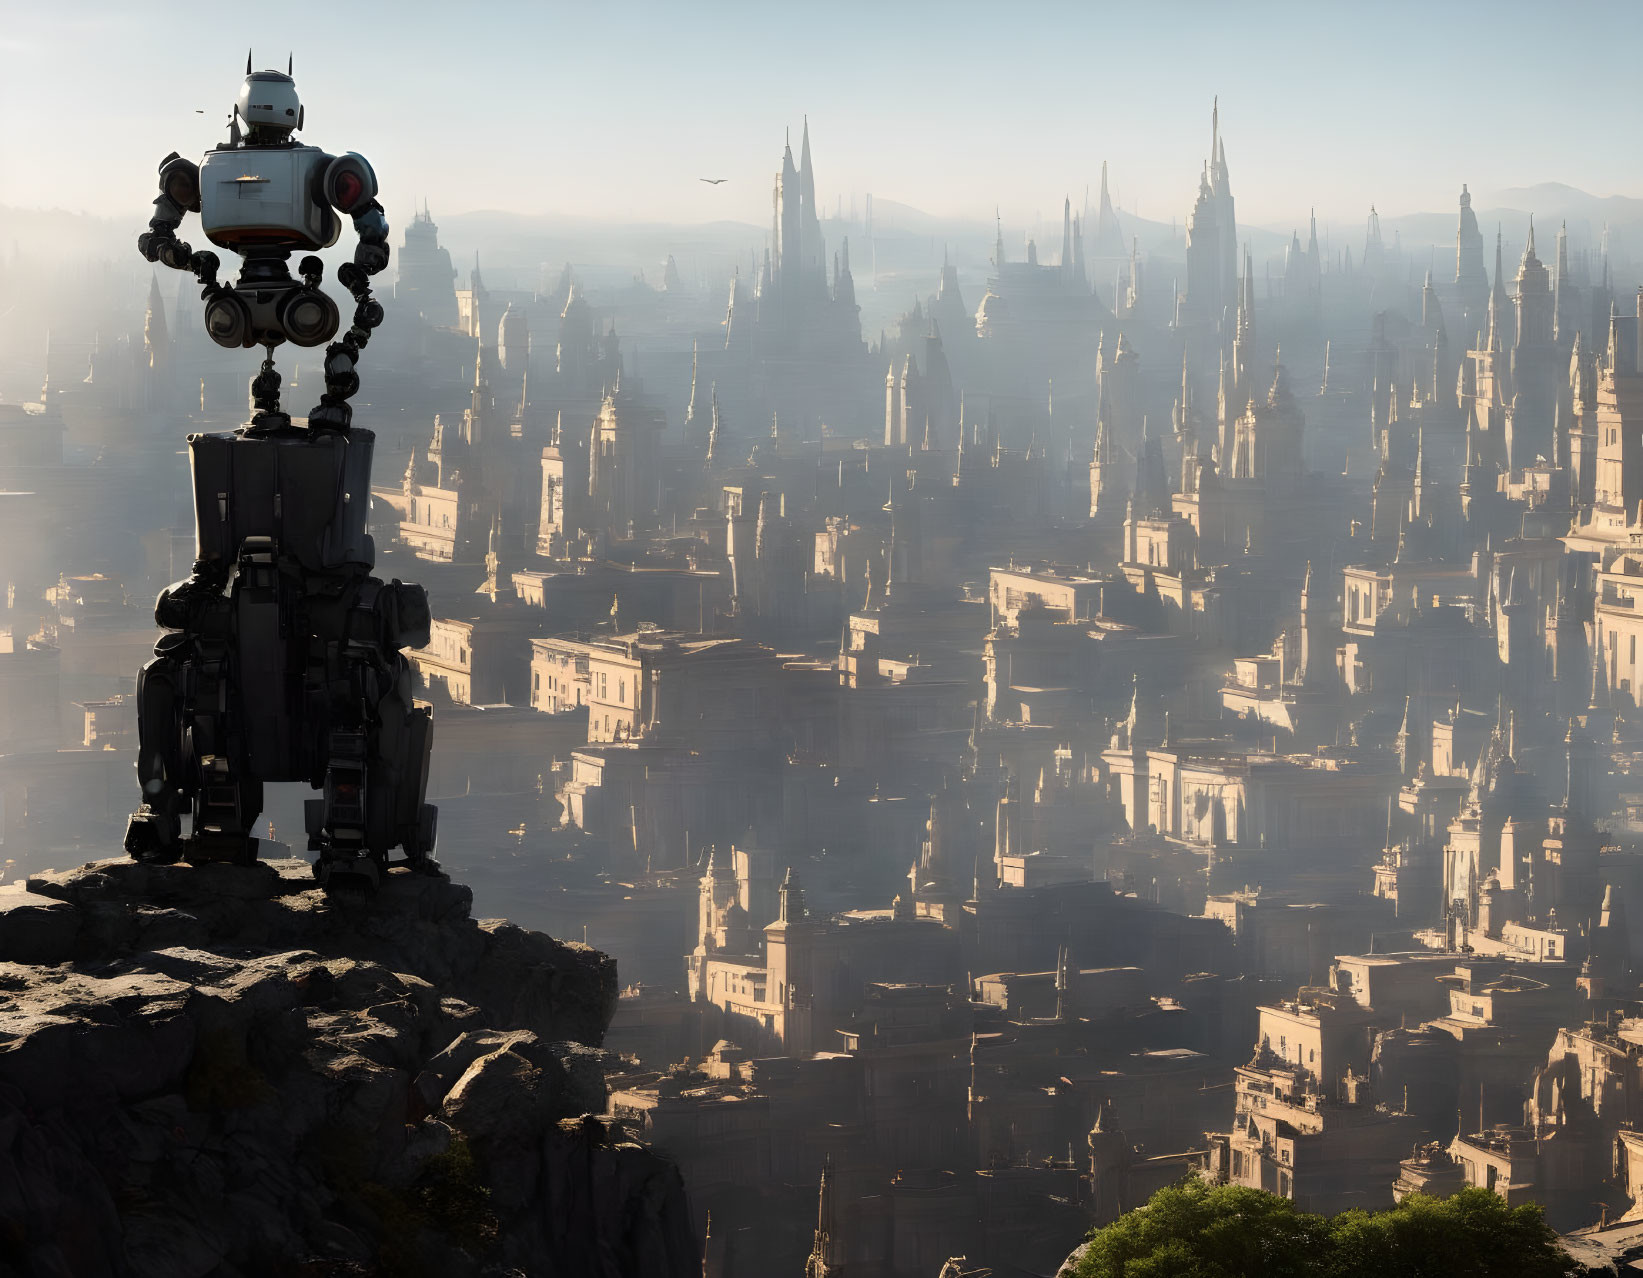 Robot overlooking cityscape at sunrise or sunset